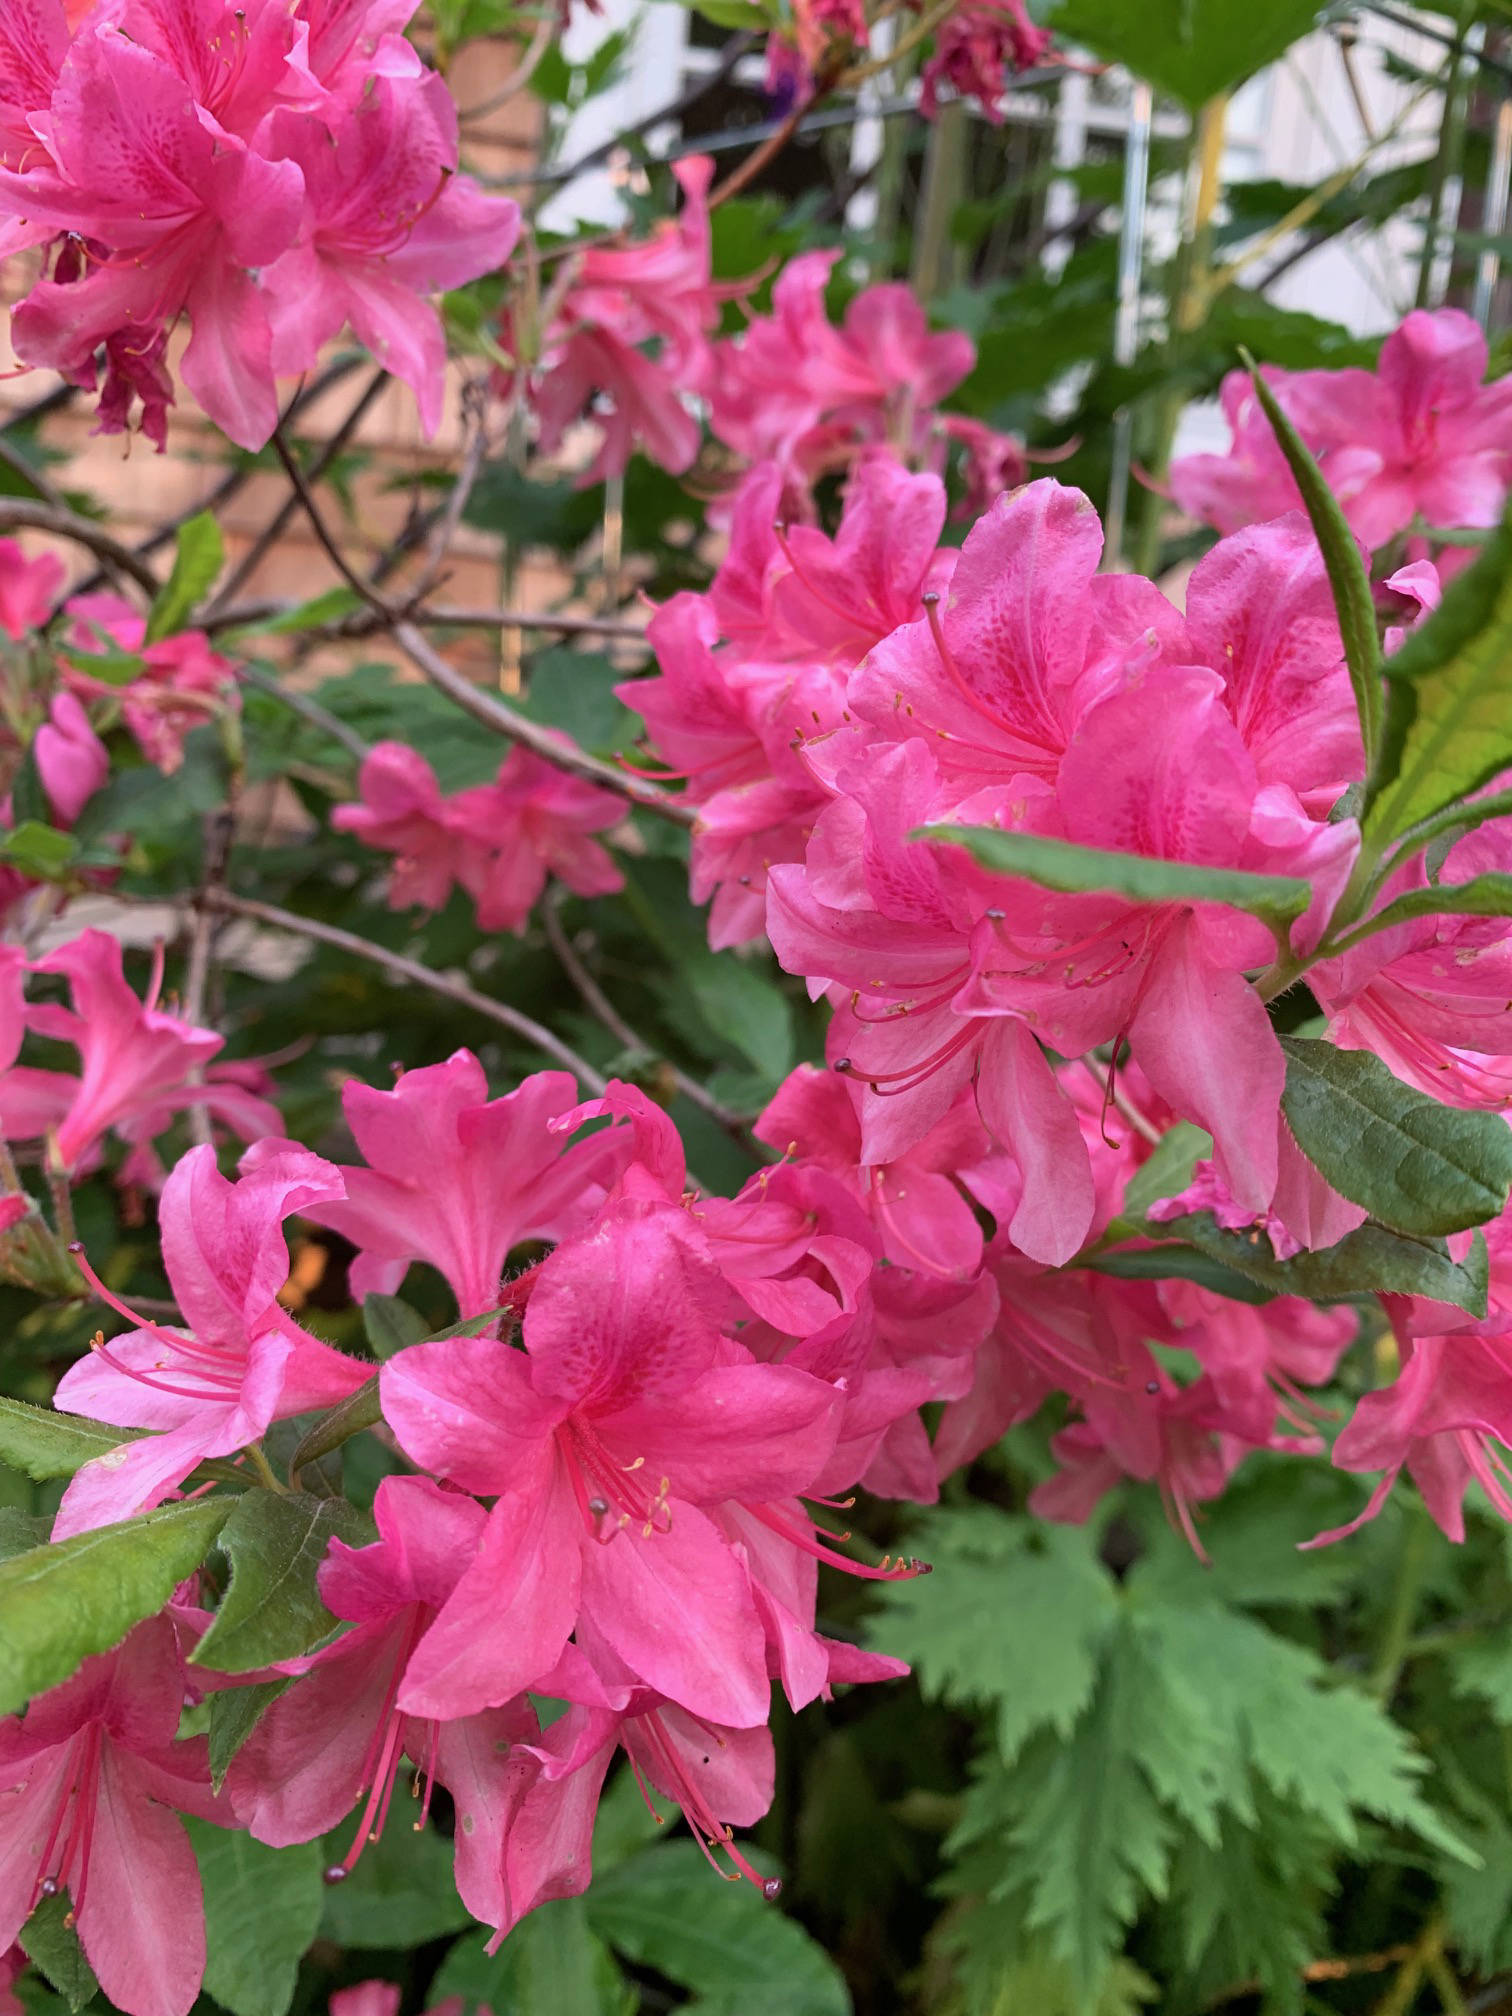 ”Blooming azaleas — what a delight,” the Kachemak Gardener said on June 28, 2019, of the flowers in her Homer, Alaska, garden. “These are two of these shrubs here that manage a burst of color each year.” (Photo by Rosemary Fitzpatrick)